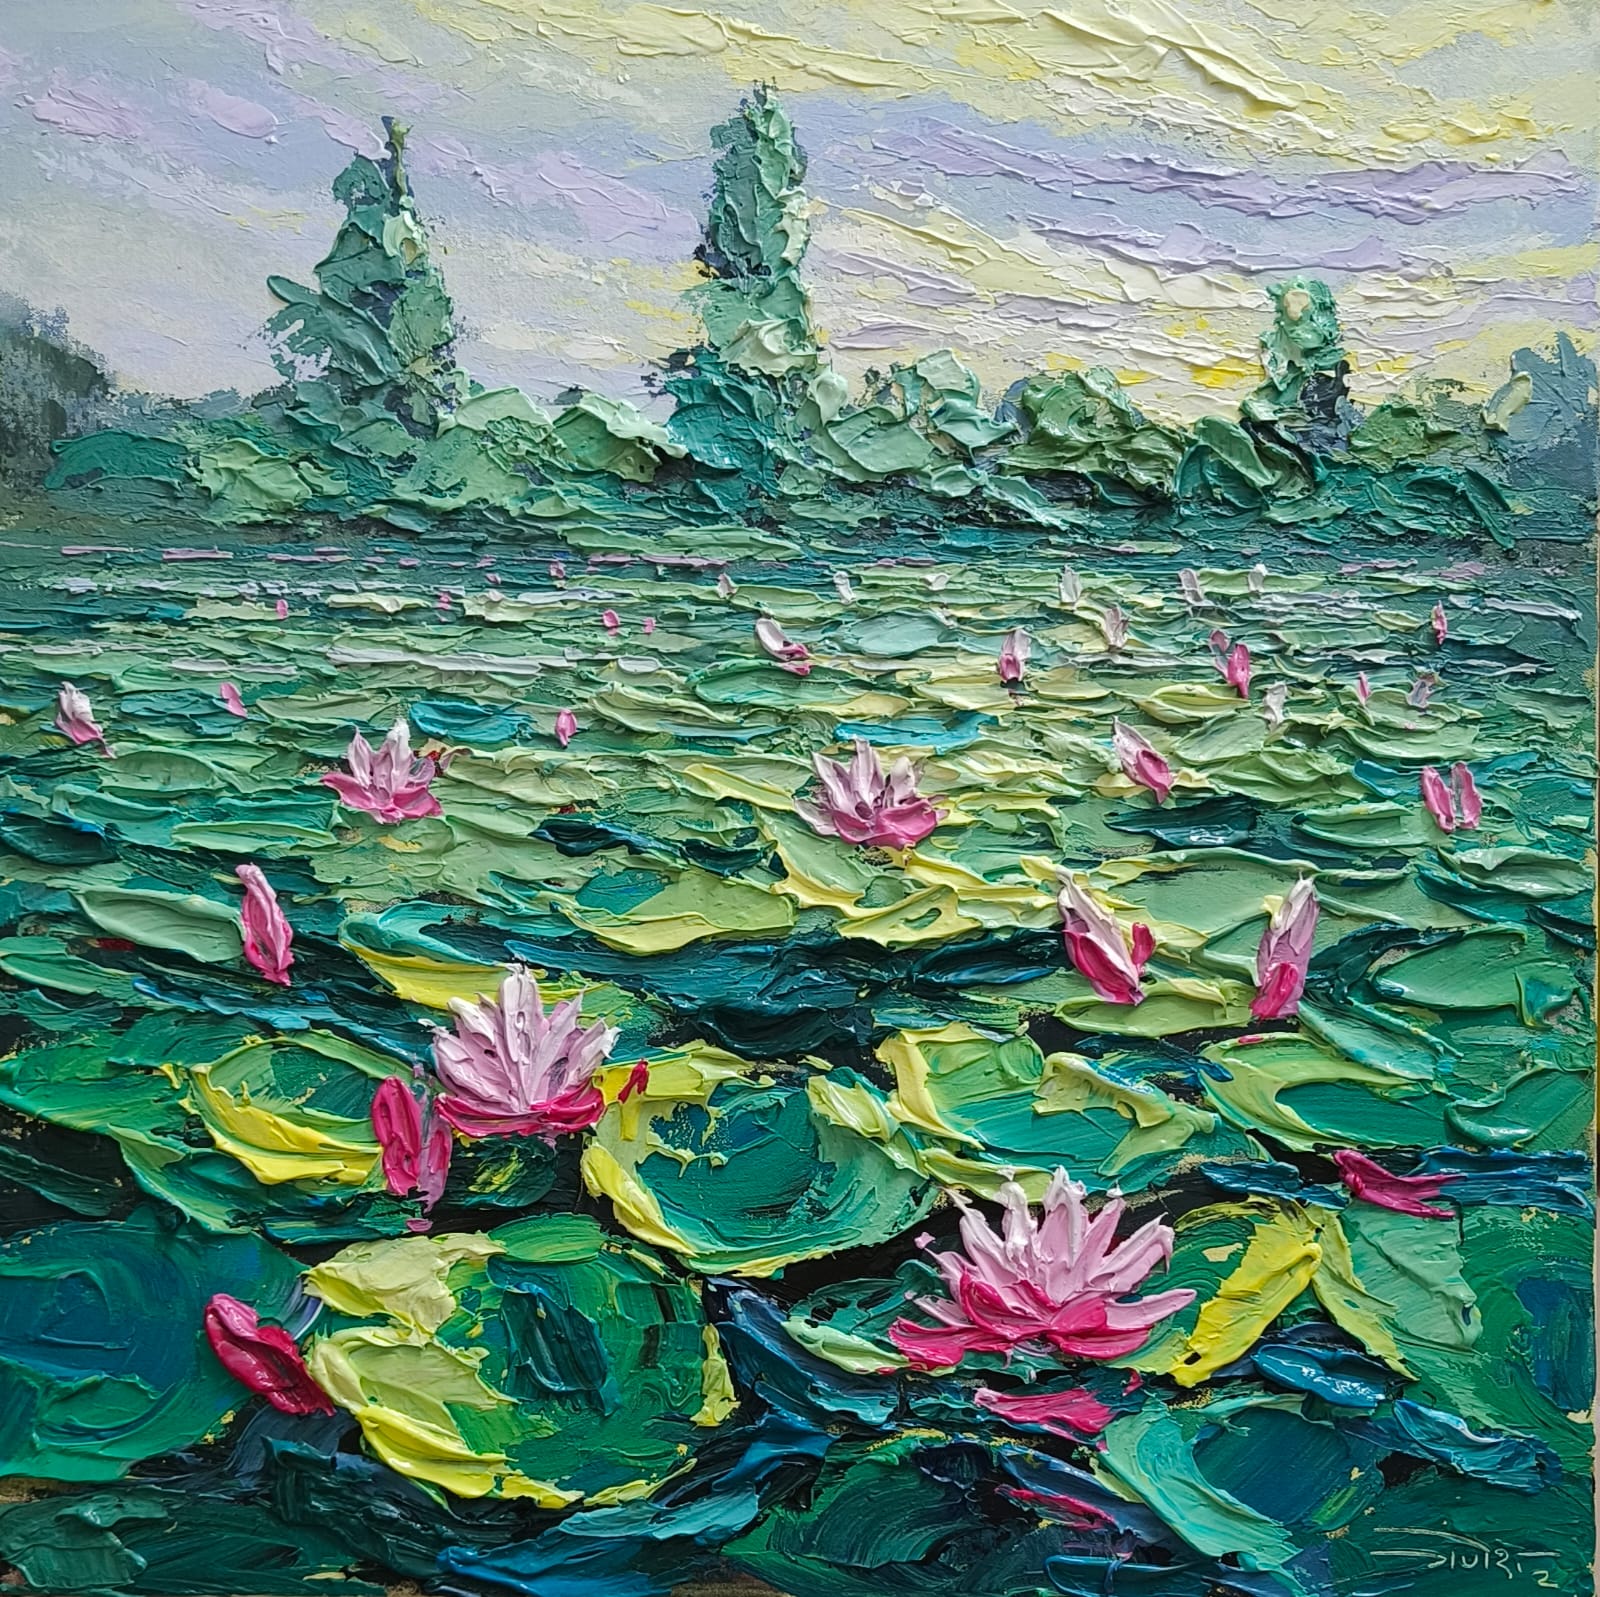 Figurative Painting with Acrylic on Canvas "Lotus (1258)" art by Ganesh Mhatre